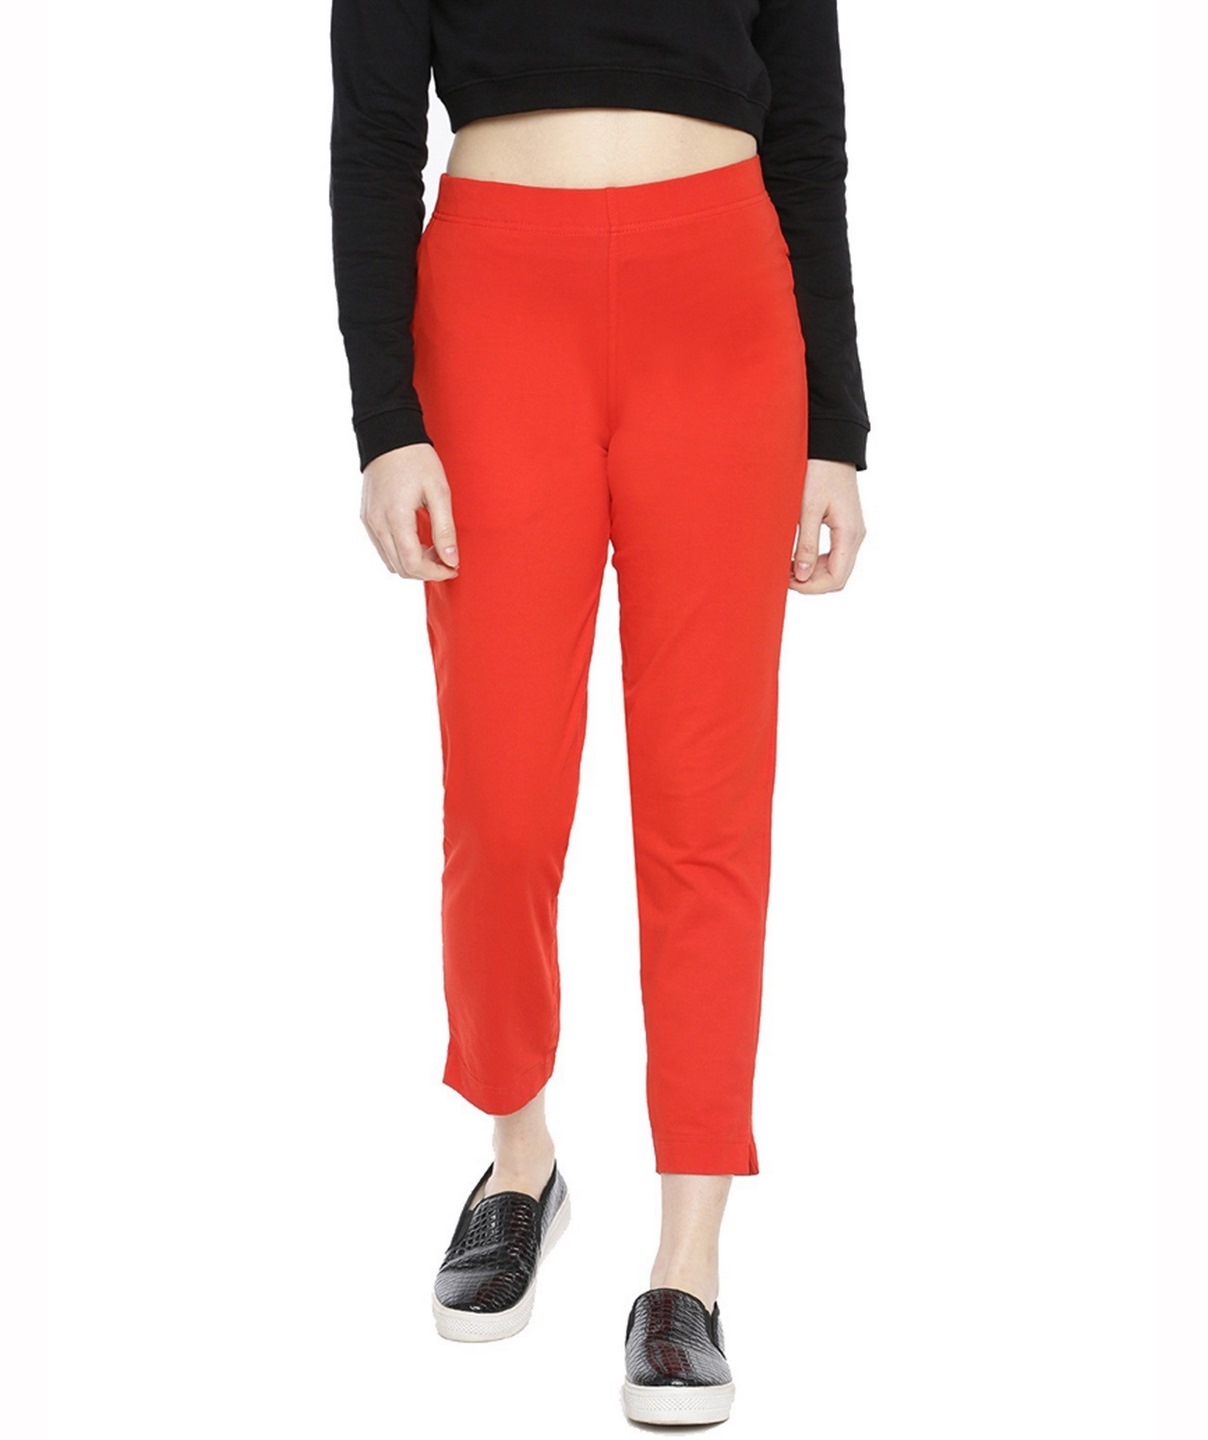 Buy JAPER KURTI Woman's Cotton Solid Red Color Cigarette Trouser Pants at  Amazon.in